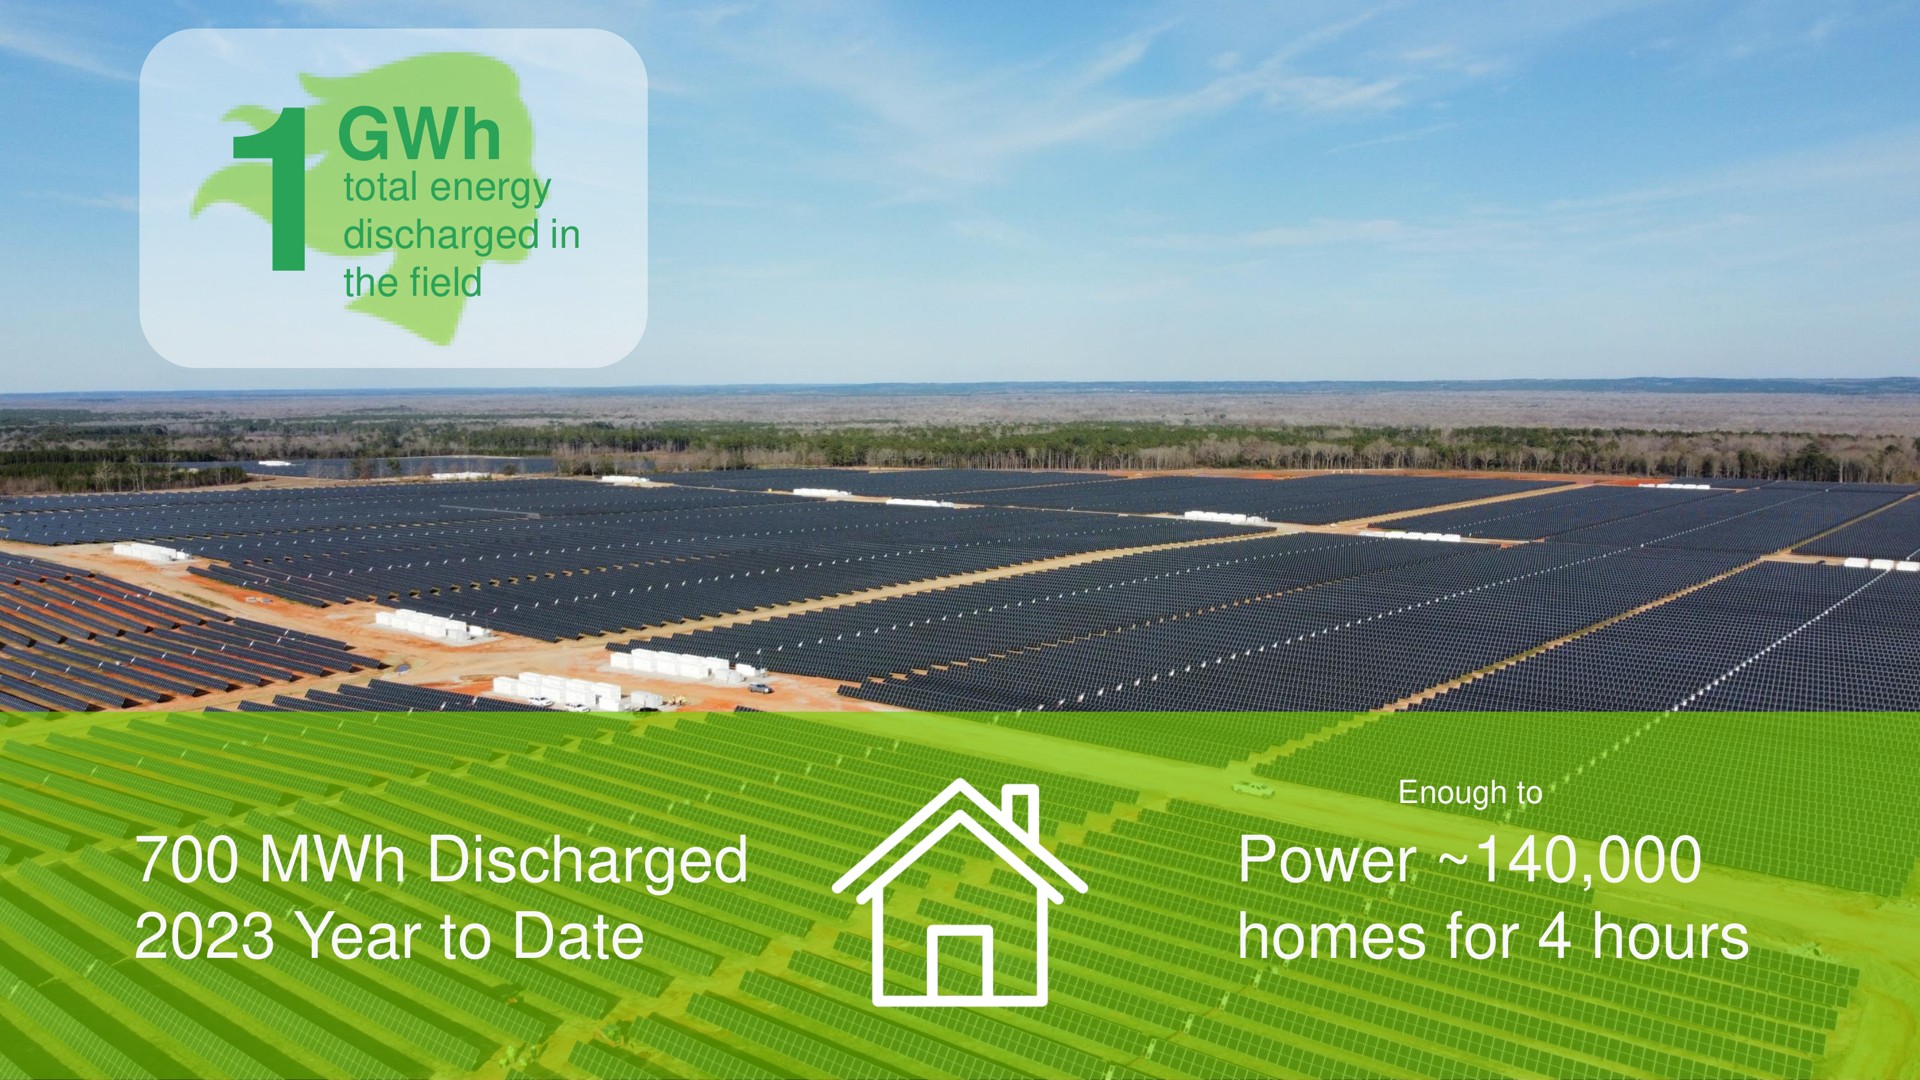 discharged year to date power homes for hours | Eos Energy